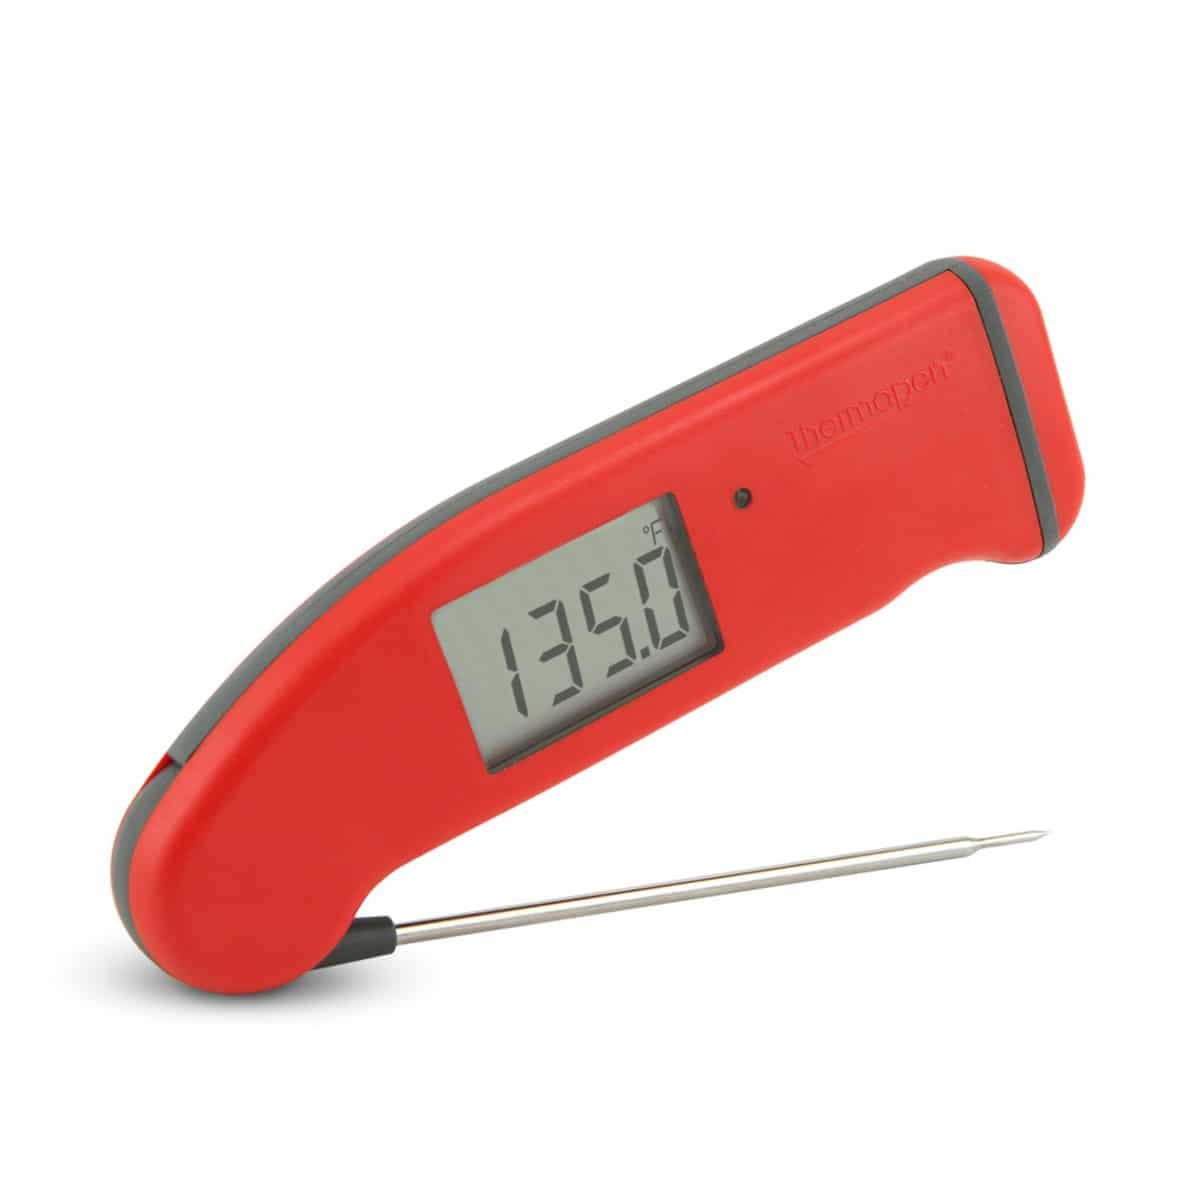 Thermapen-MK4-Meat-Thermometer.jpg